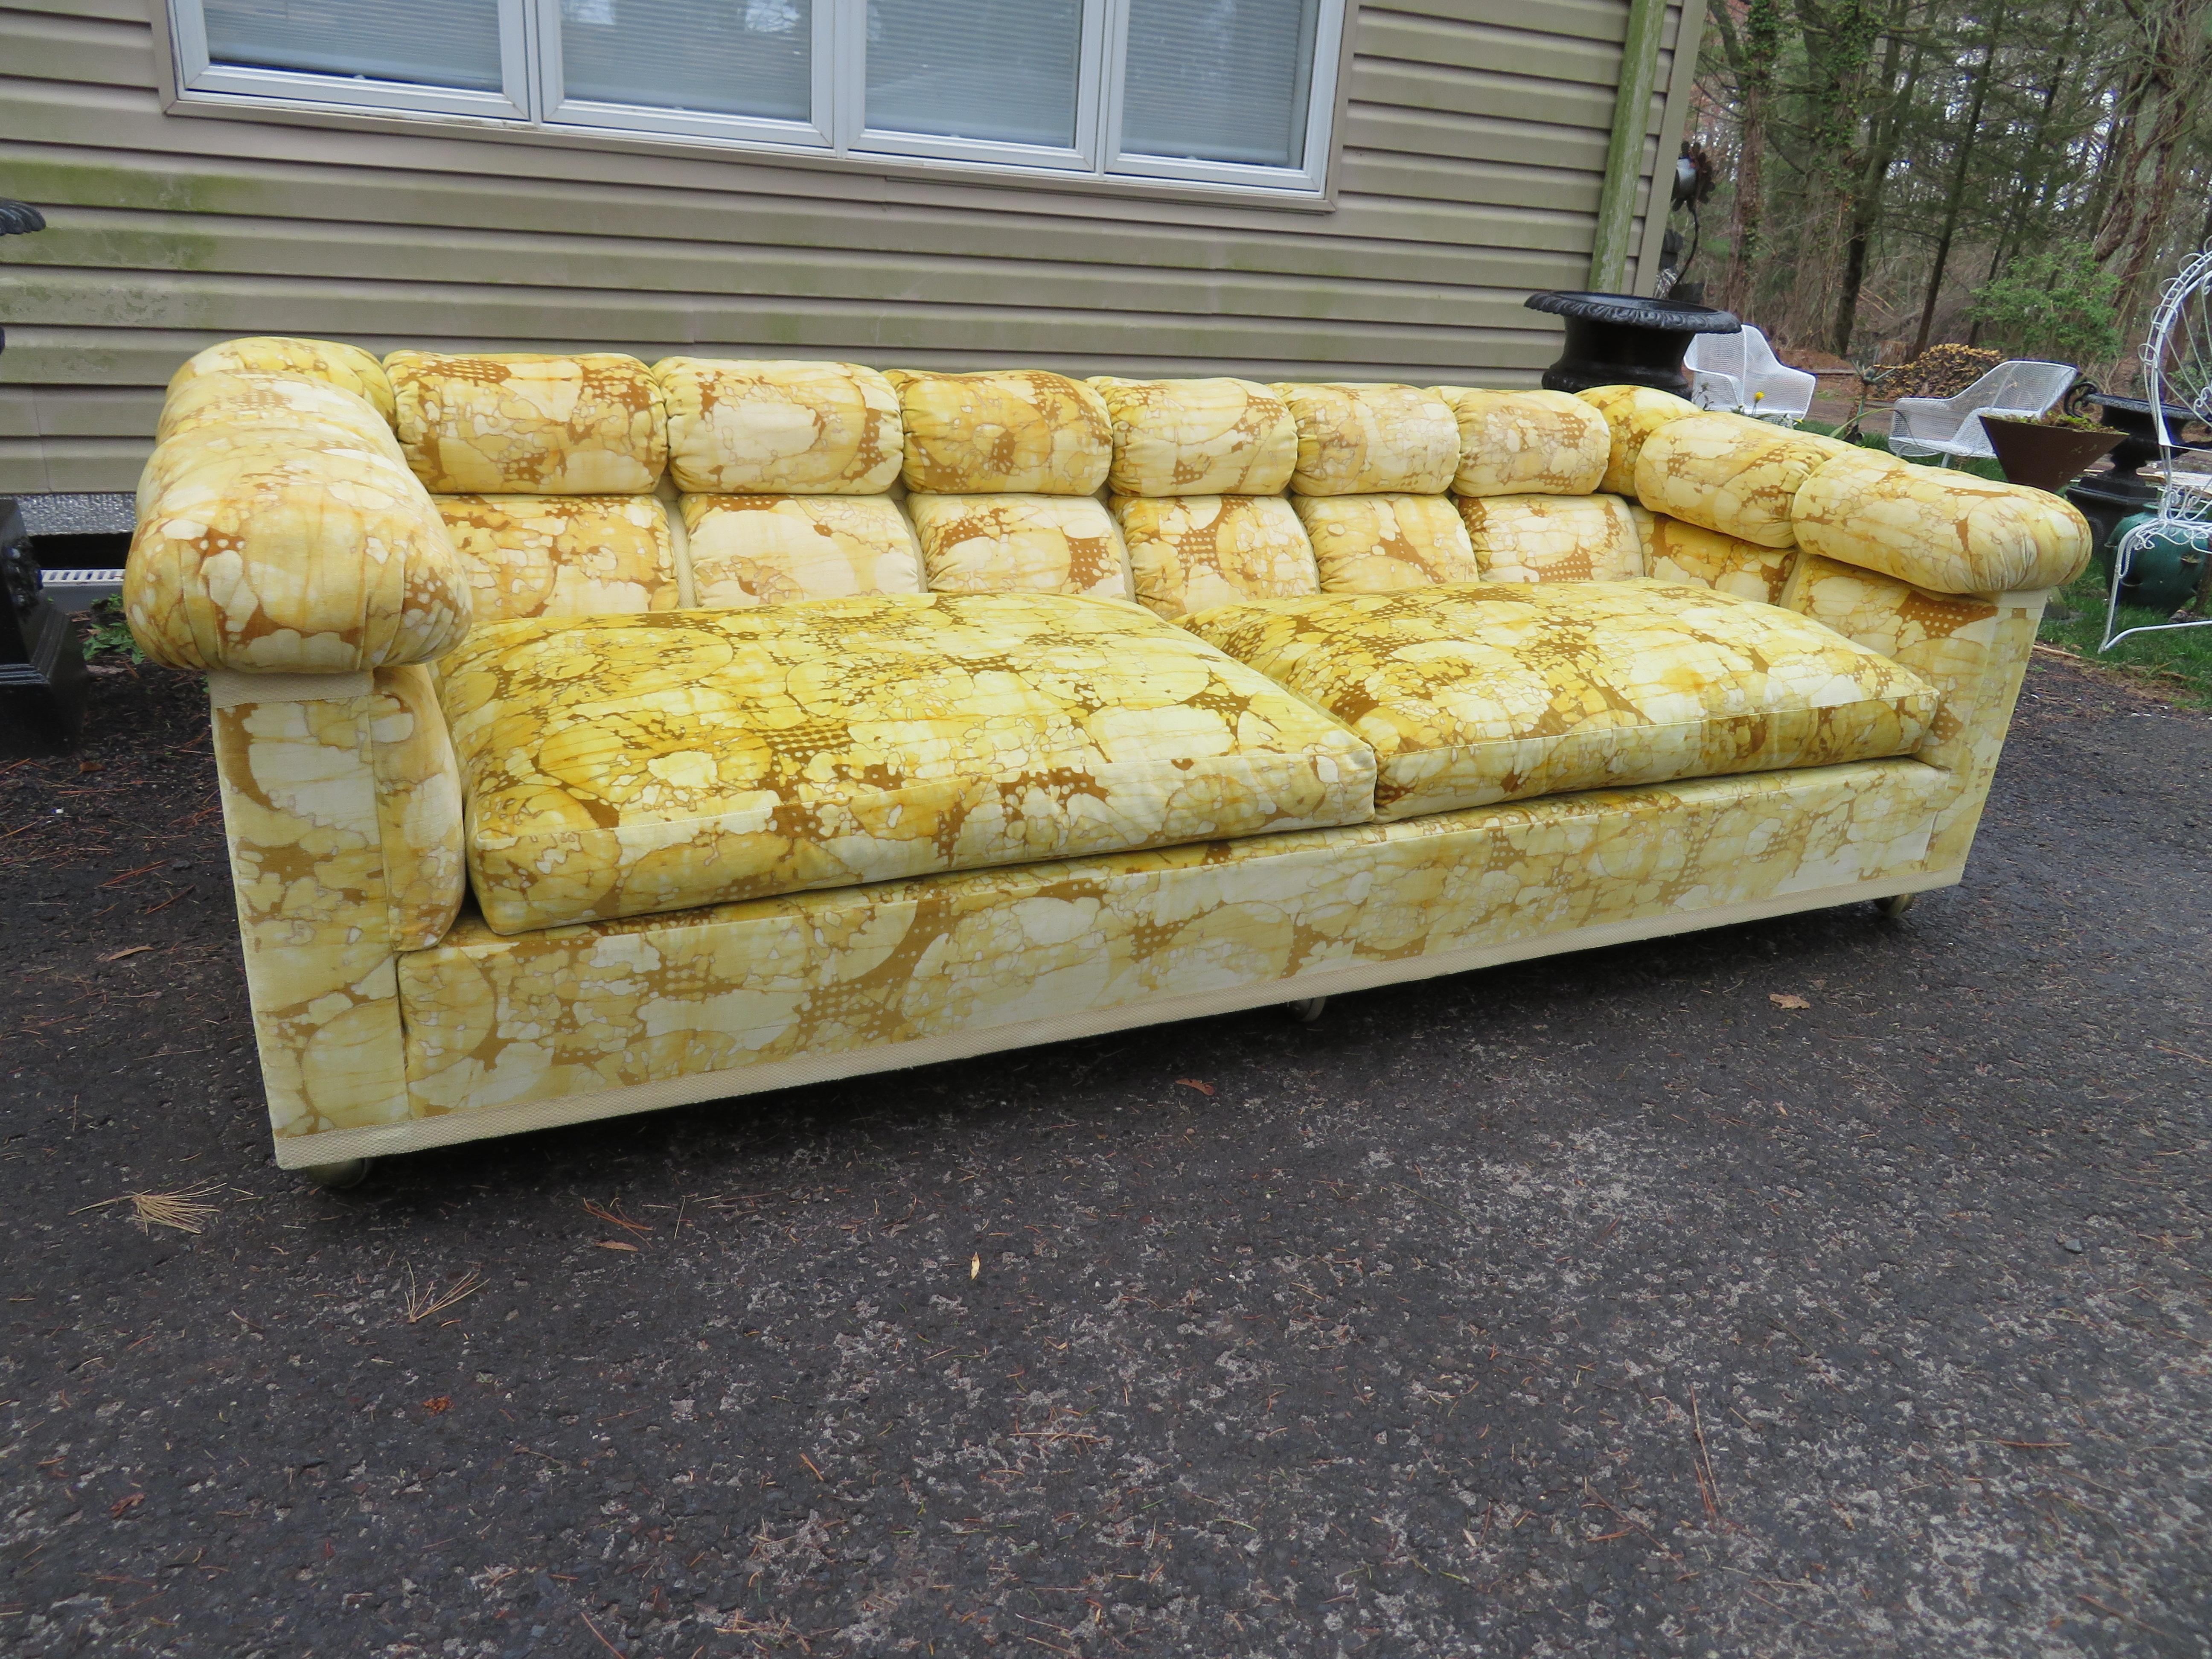 Rare signed Dunbar Chesterfield party sofa with original Jack Lenor Larsen. We have never seen another Dunbar sofa quite like this-check out the unusual way the sofa has been tufted-similar to Wormley Party sofa. This sofa retains it's original Jack